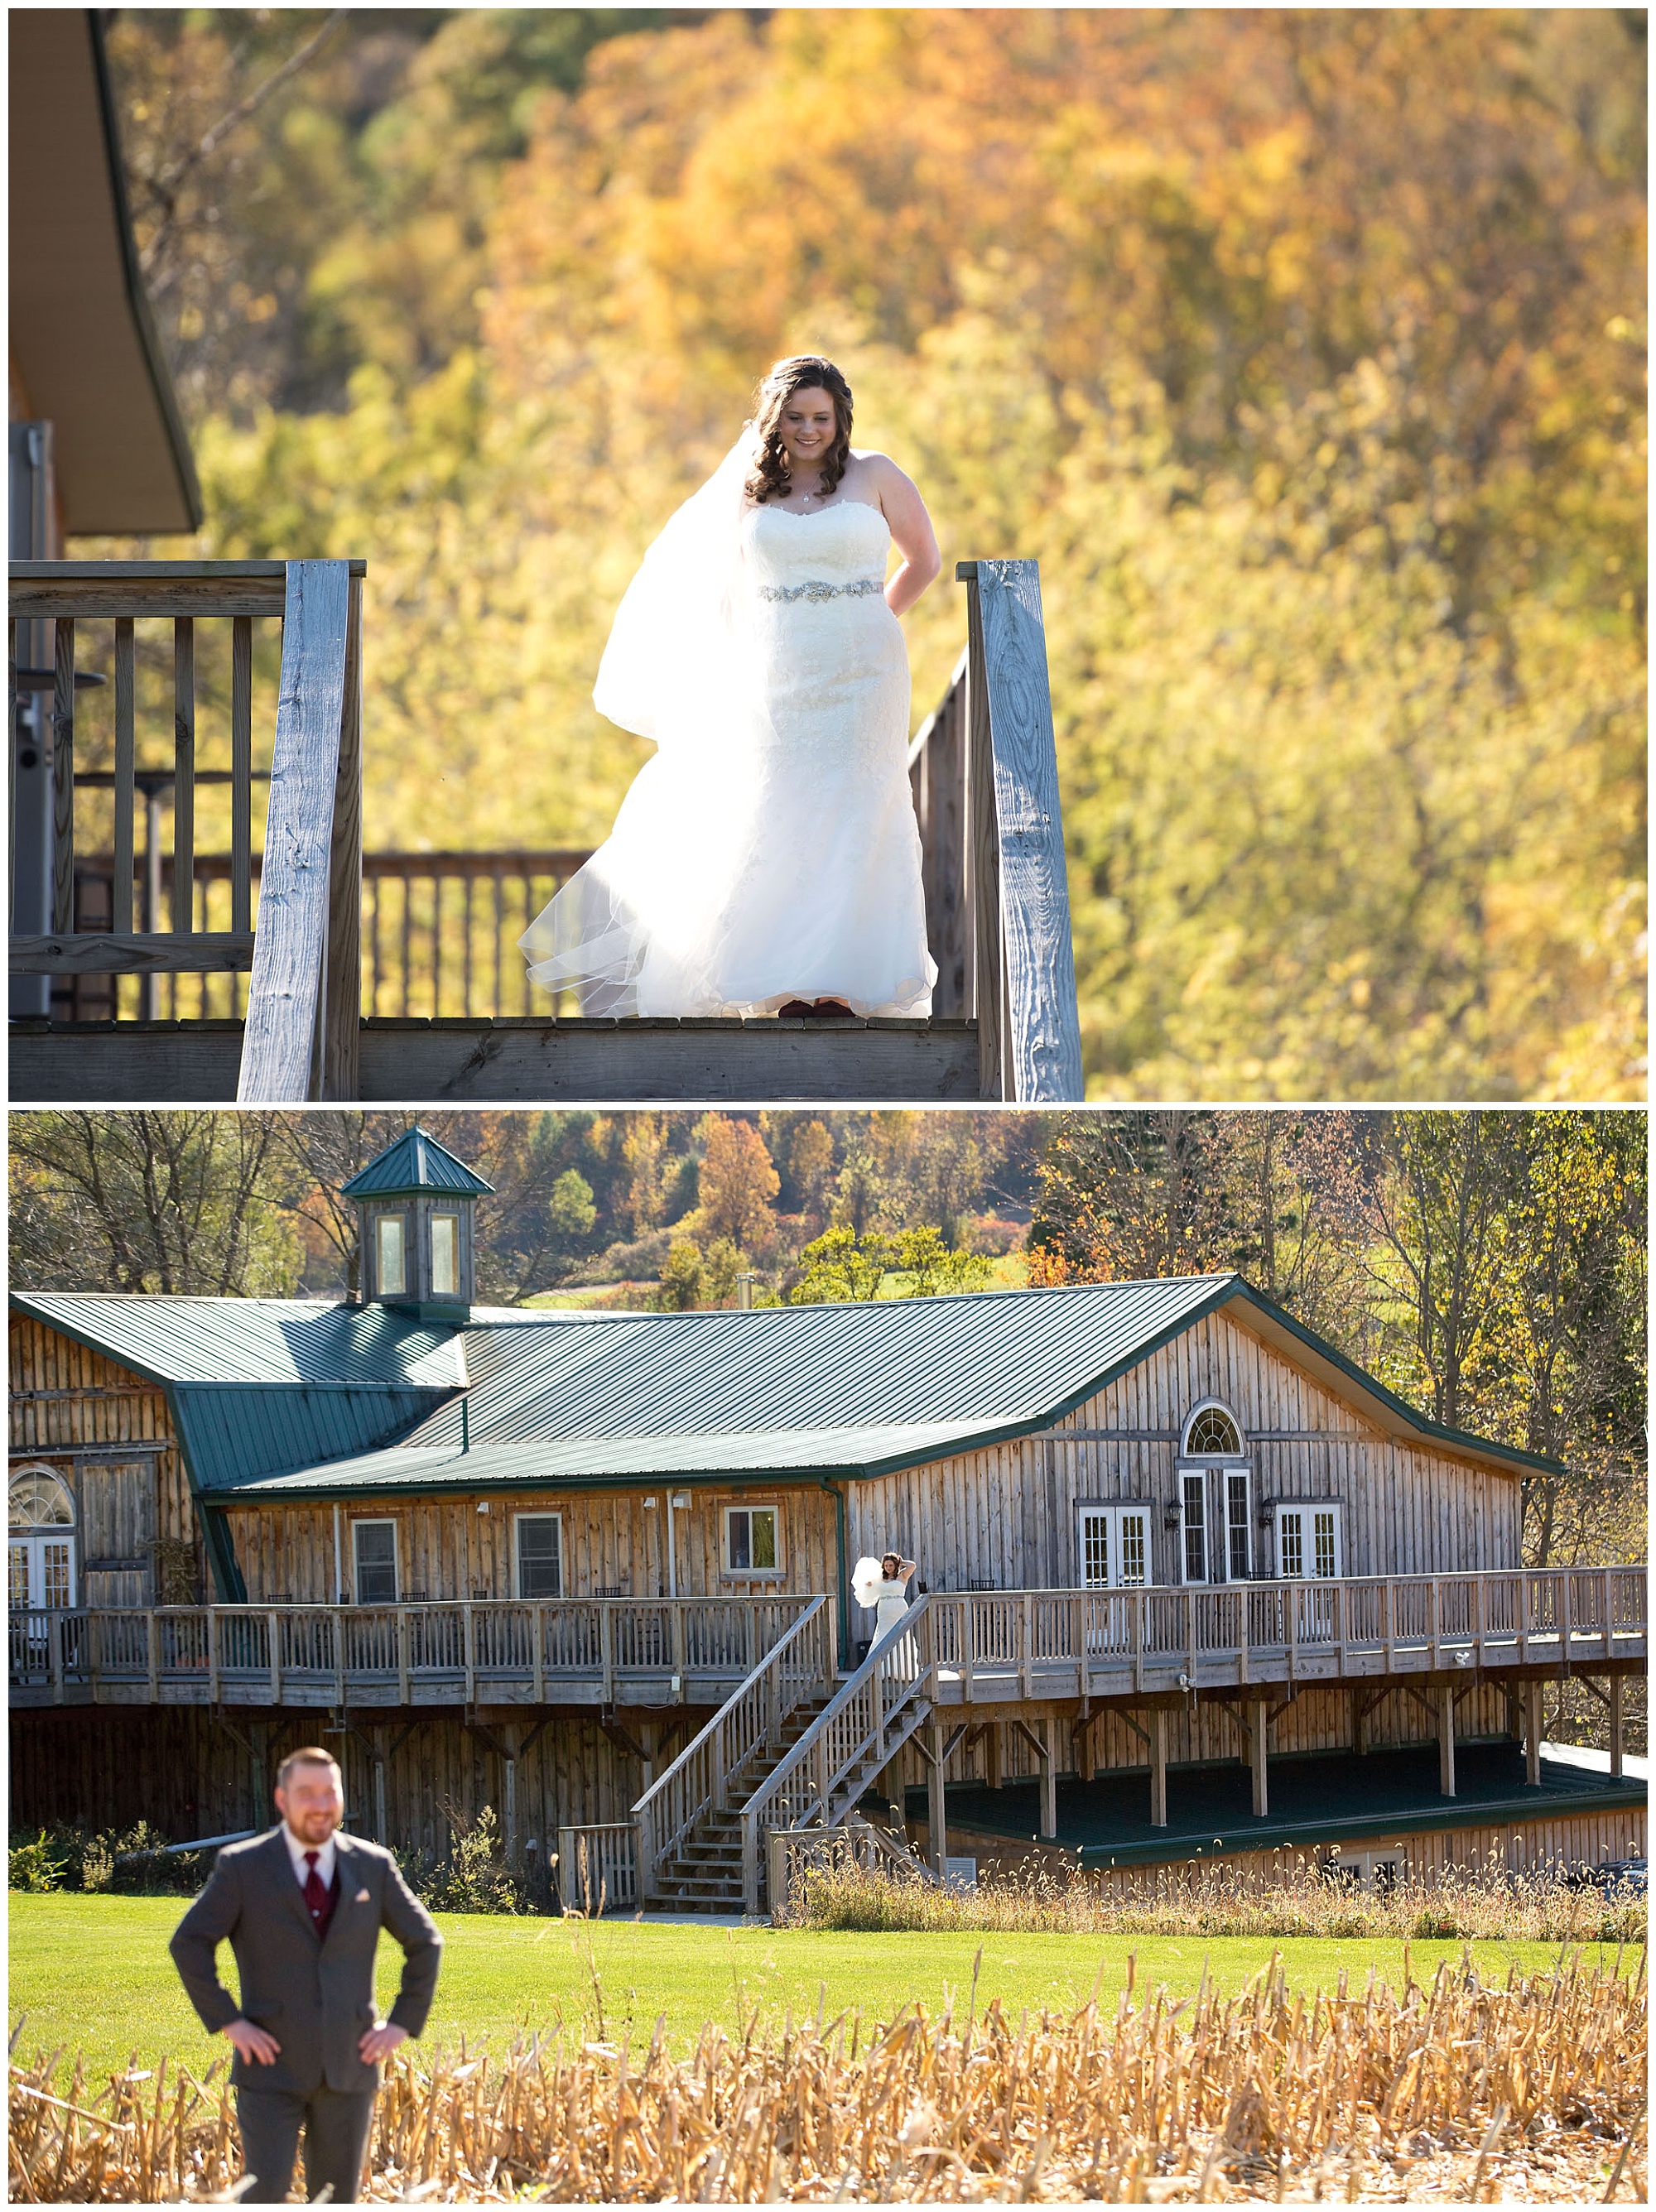 Two Photos. First, a bride ready to desend the steps to meet her grrom for a first look prior to the ceremony. The second is a distant picture of the bride in the backgound and her groom in the foreground .